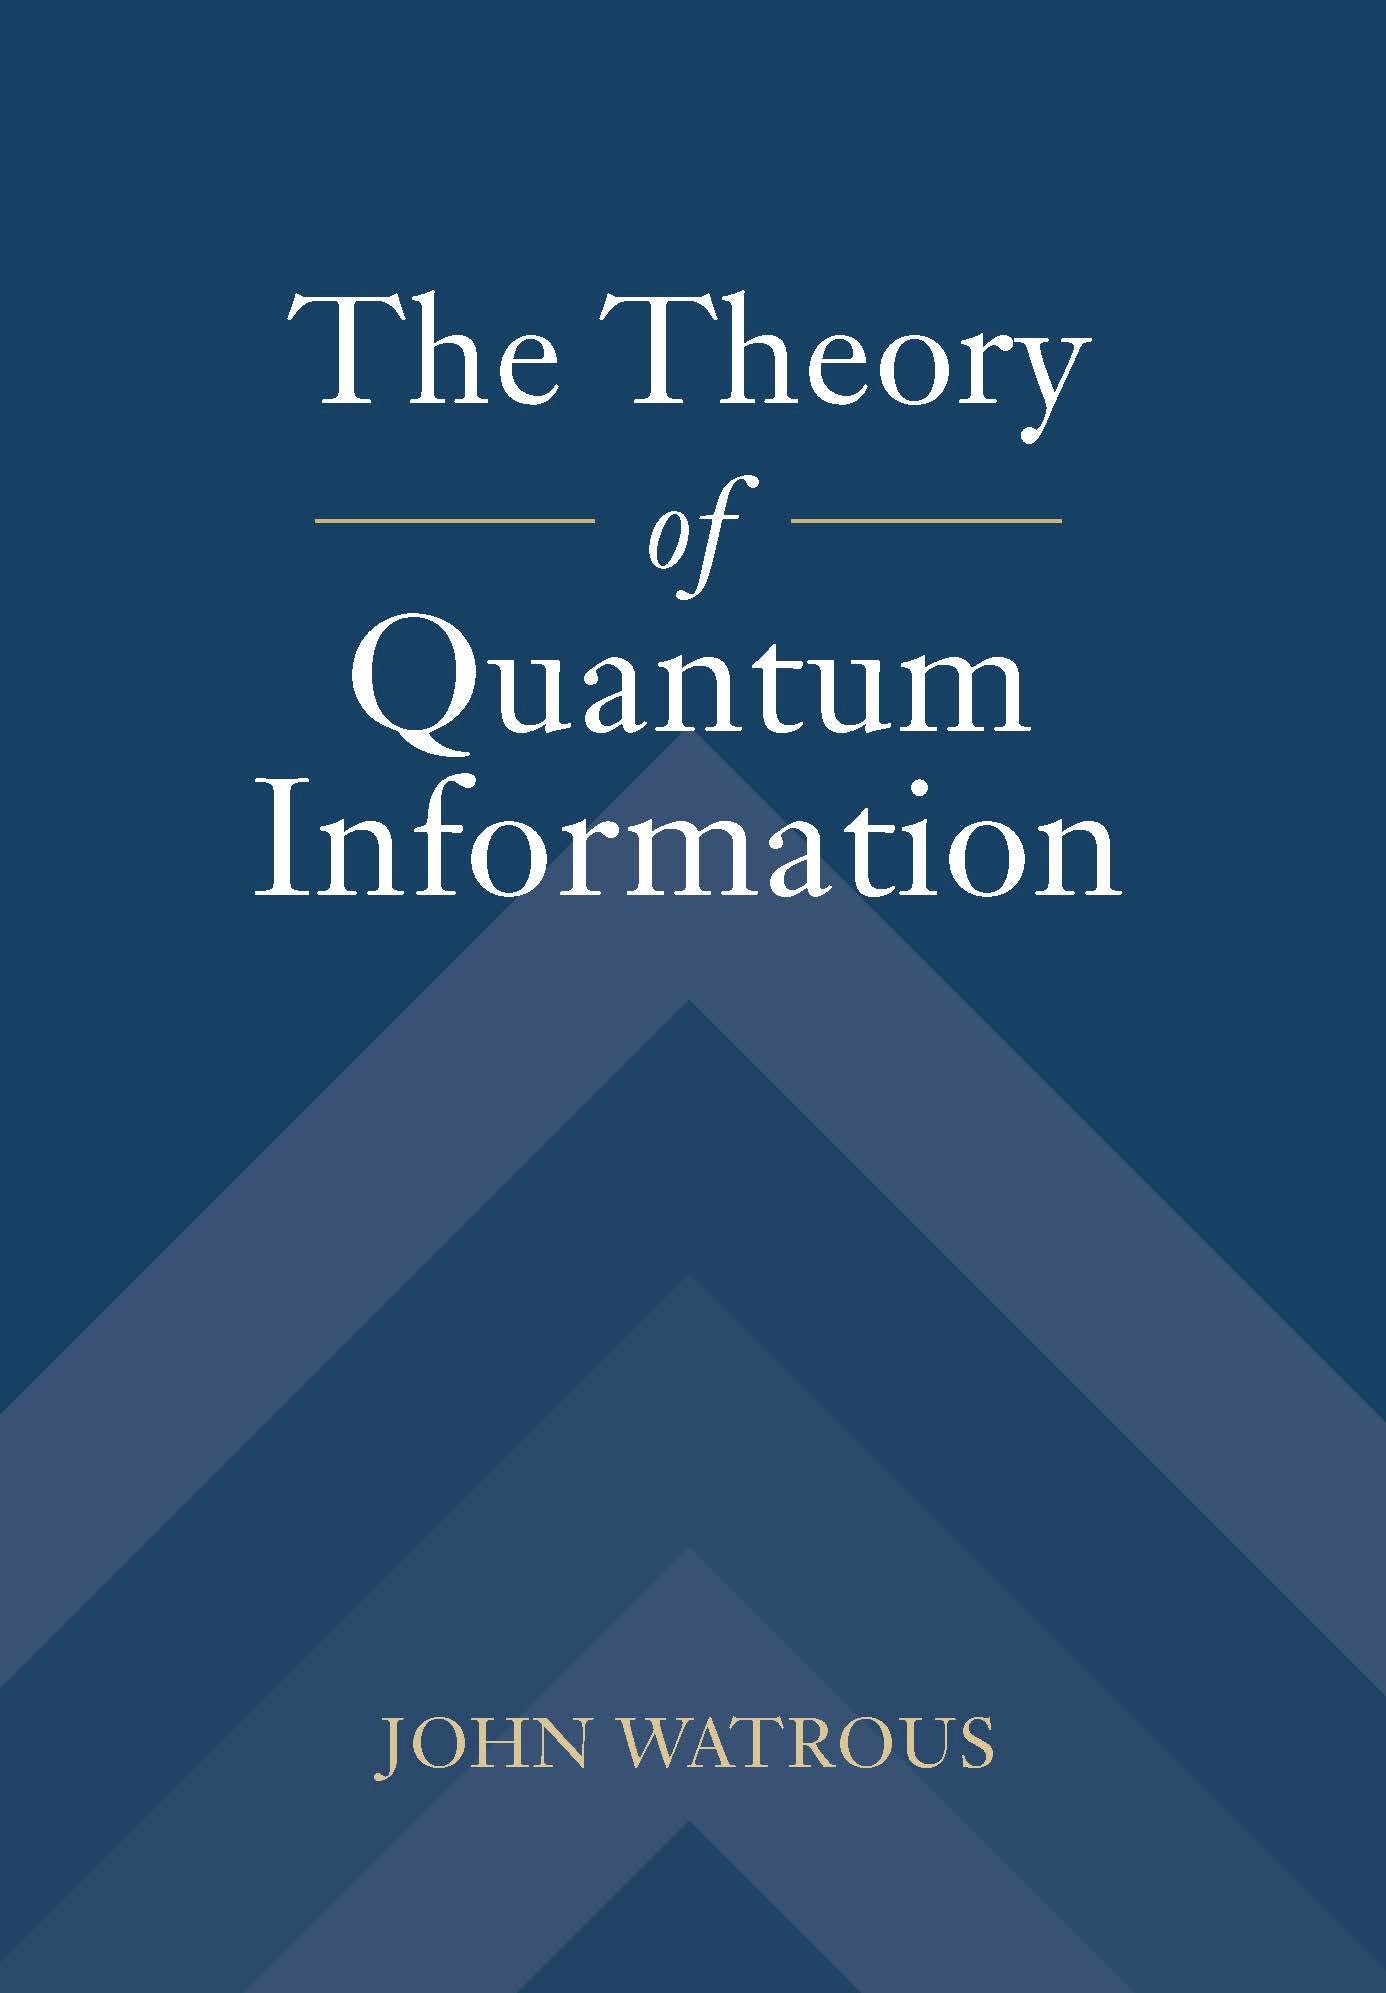 The Theory of Quantum Information book cover